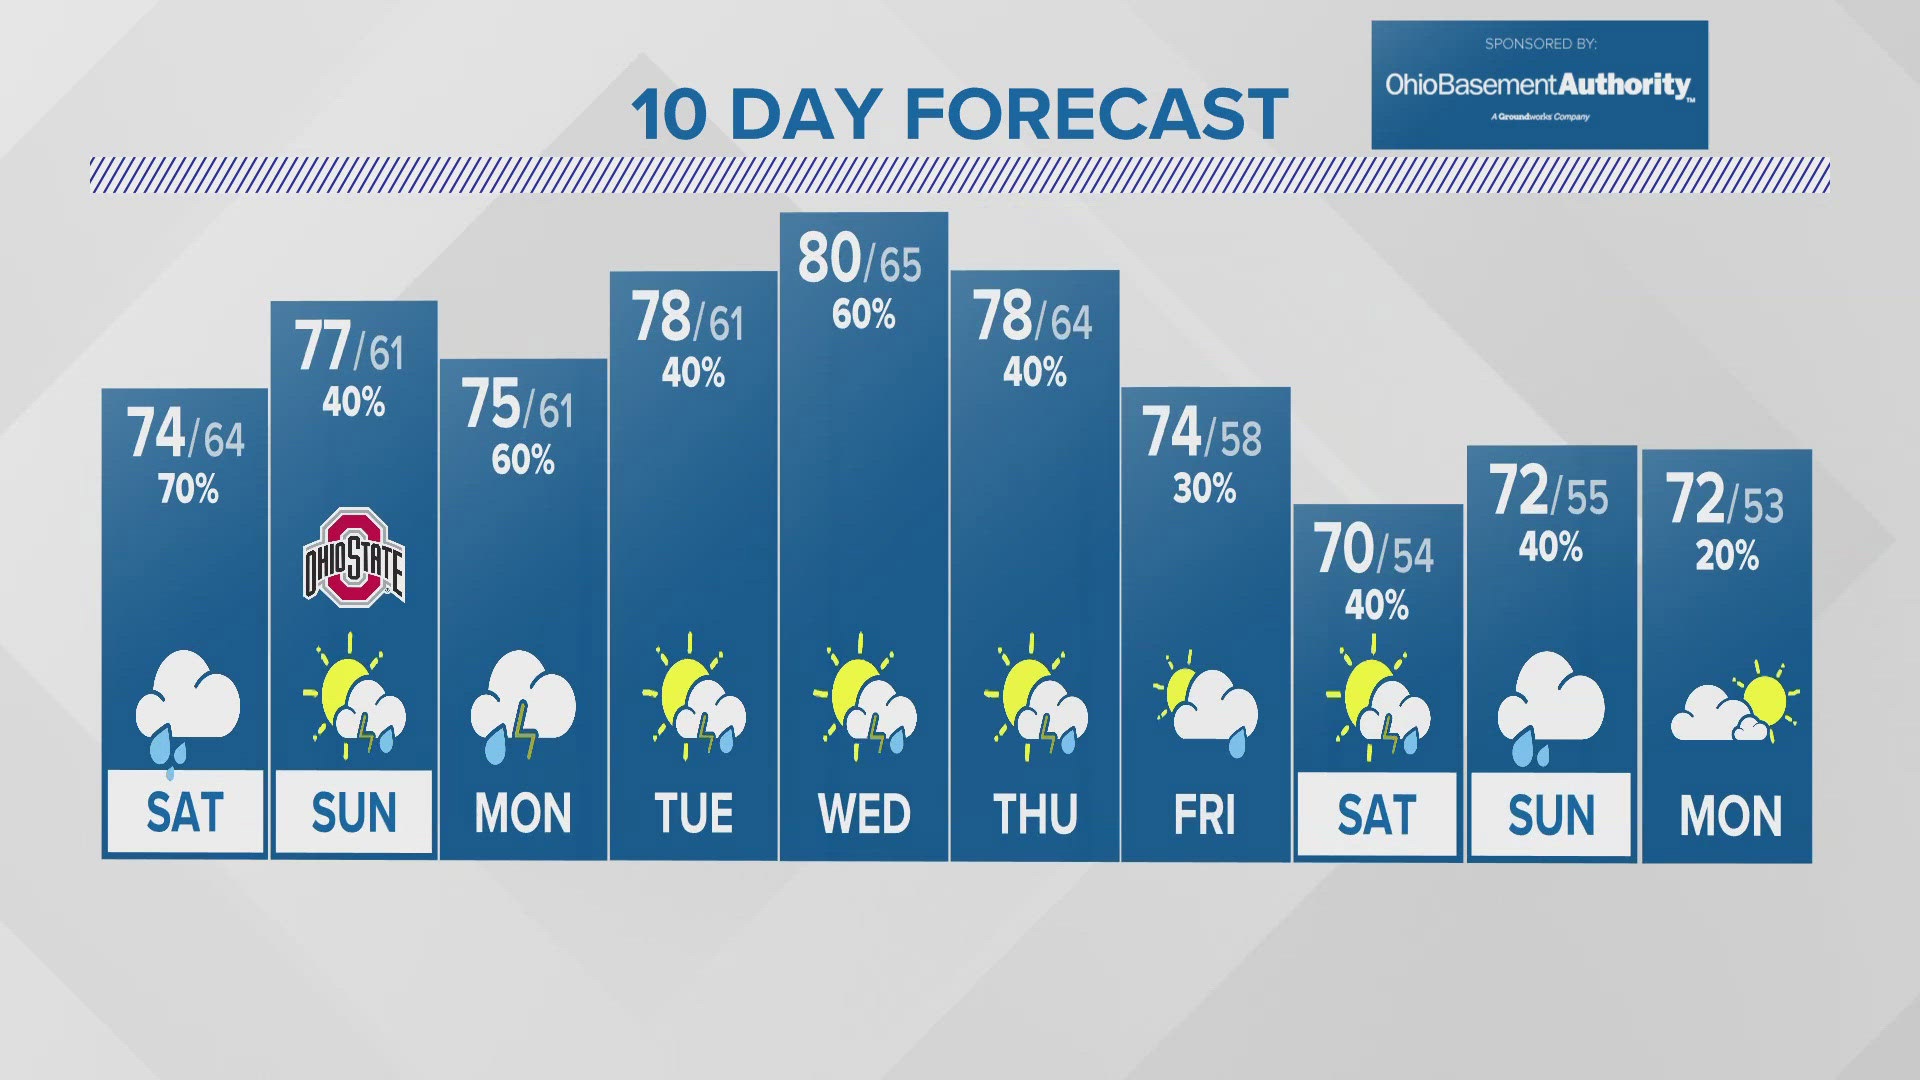 More showers rolling in this weekend and into next week.